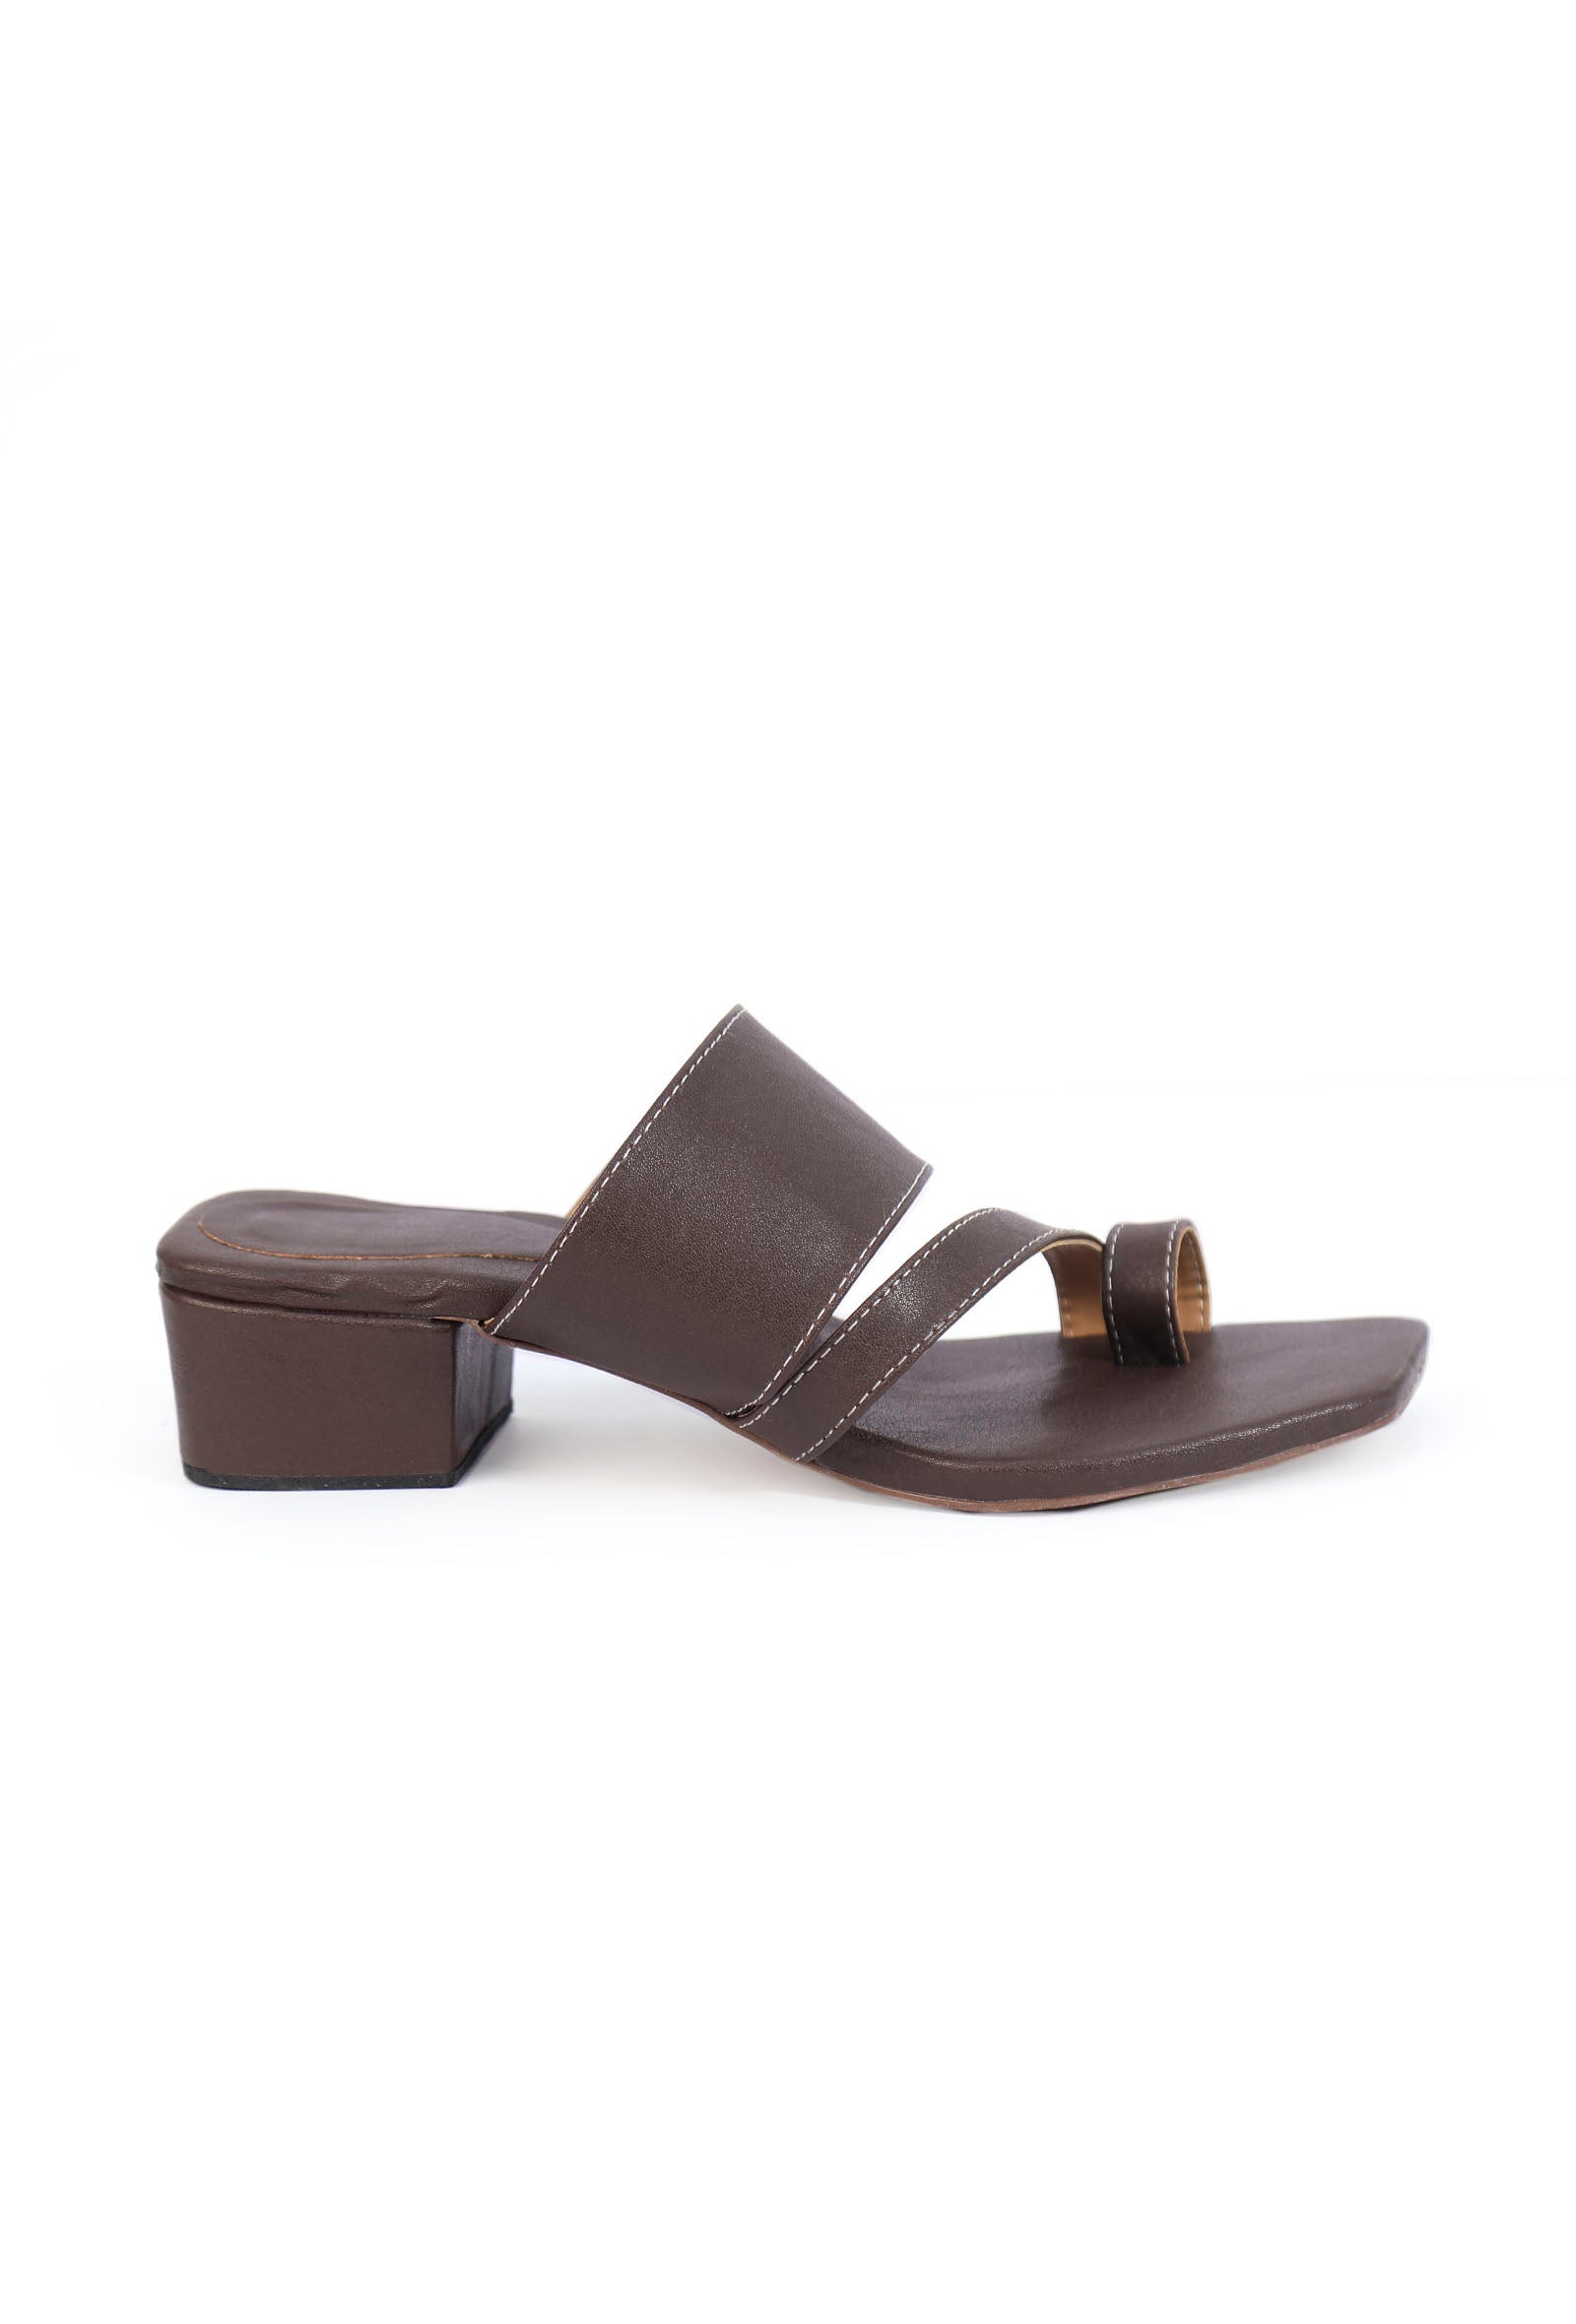 Umber Brown Cruelty Free Leather Strap Heels